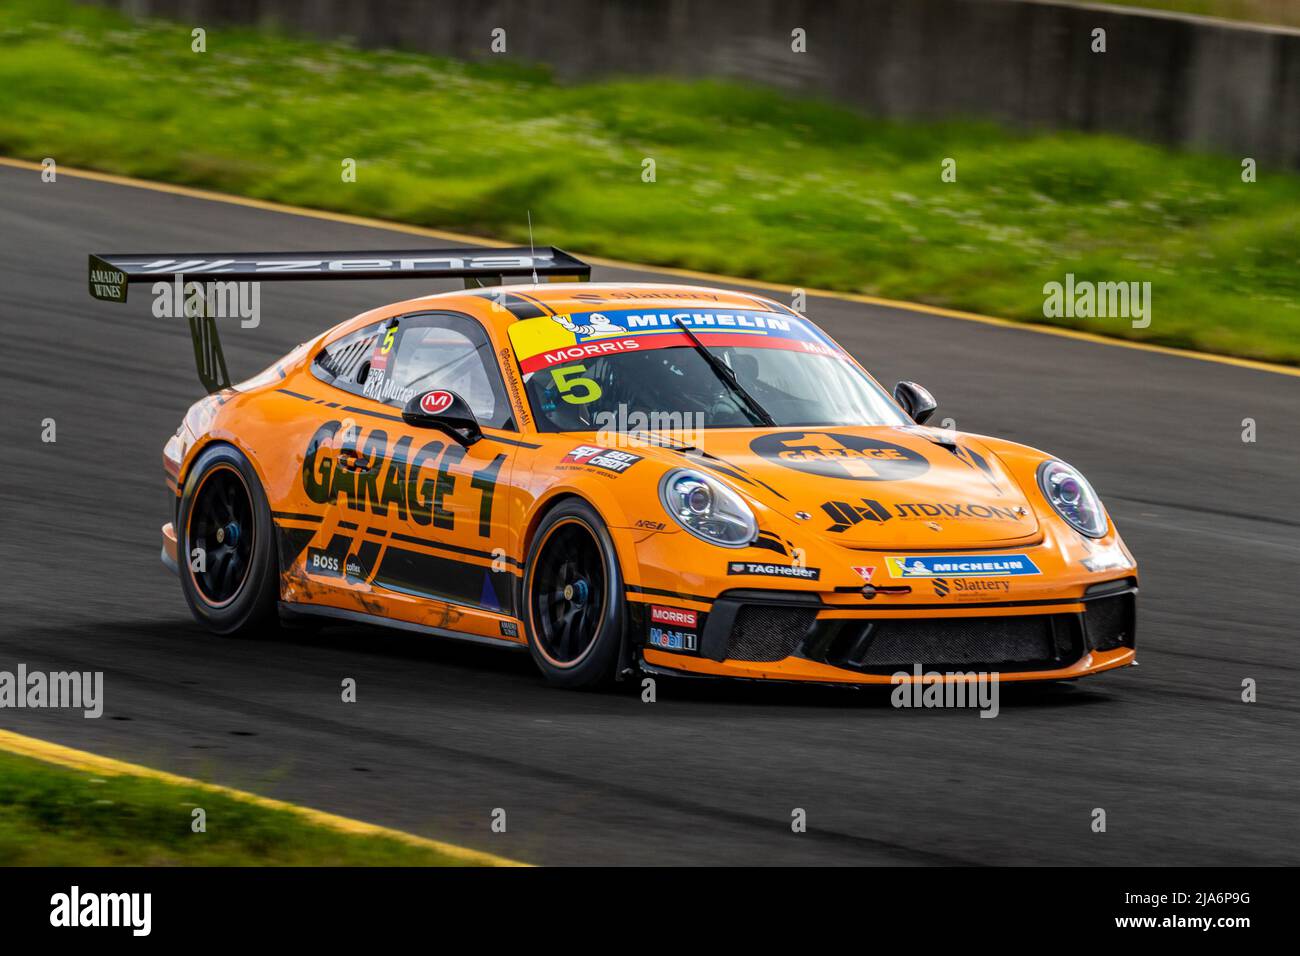 Sydney, Australia. 27 May, 2022. Nathan Murray piloting his Porsche Carrera Cup car down towards turn 2 at Sydney Motorsport Park during race 2 of the Porsche Michelin Sprint Challenge. Credit: James Forrester / Alamy Live News. Stock Photo